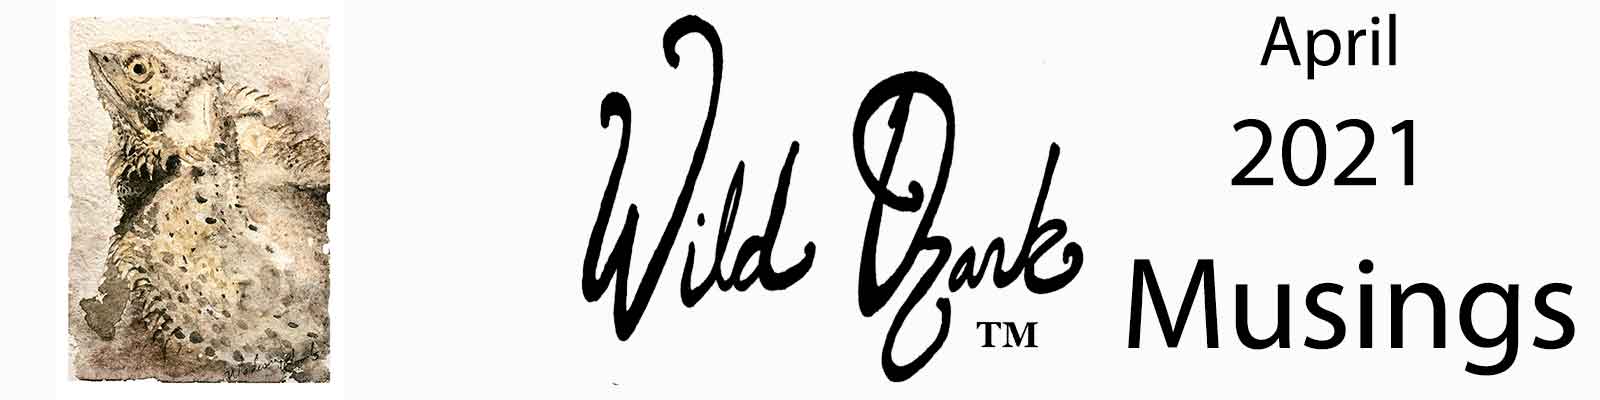 Header for the April 2021 issue of Wild Ozark Musings